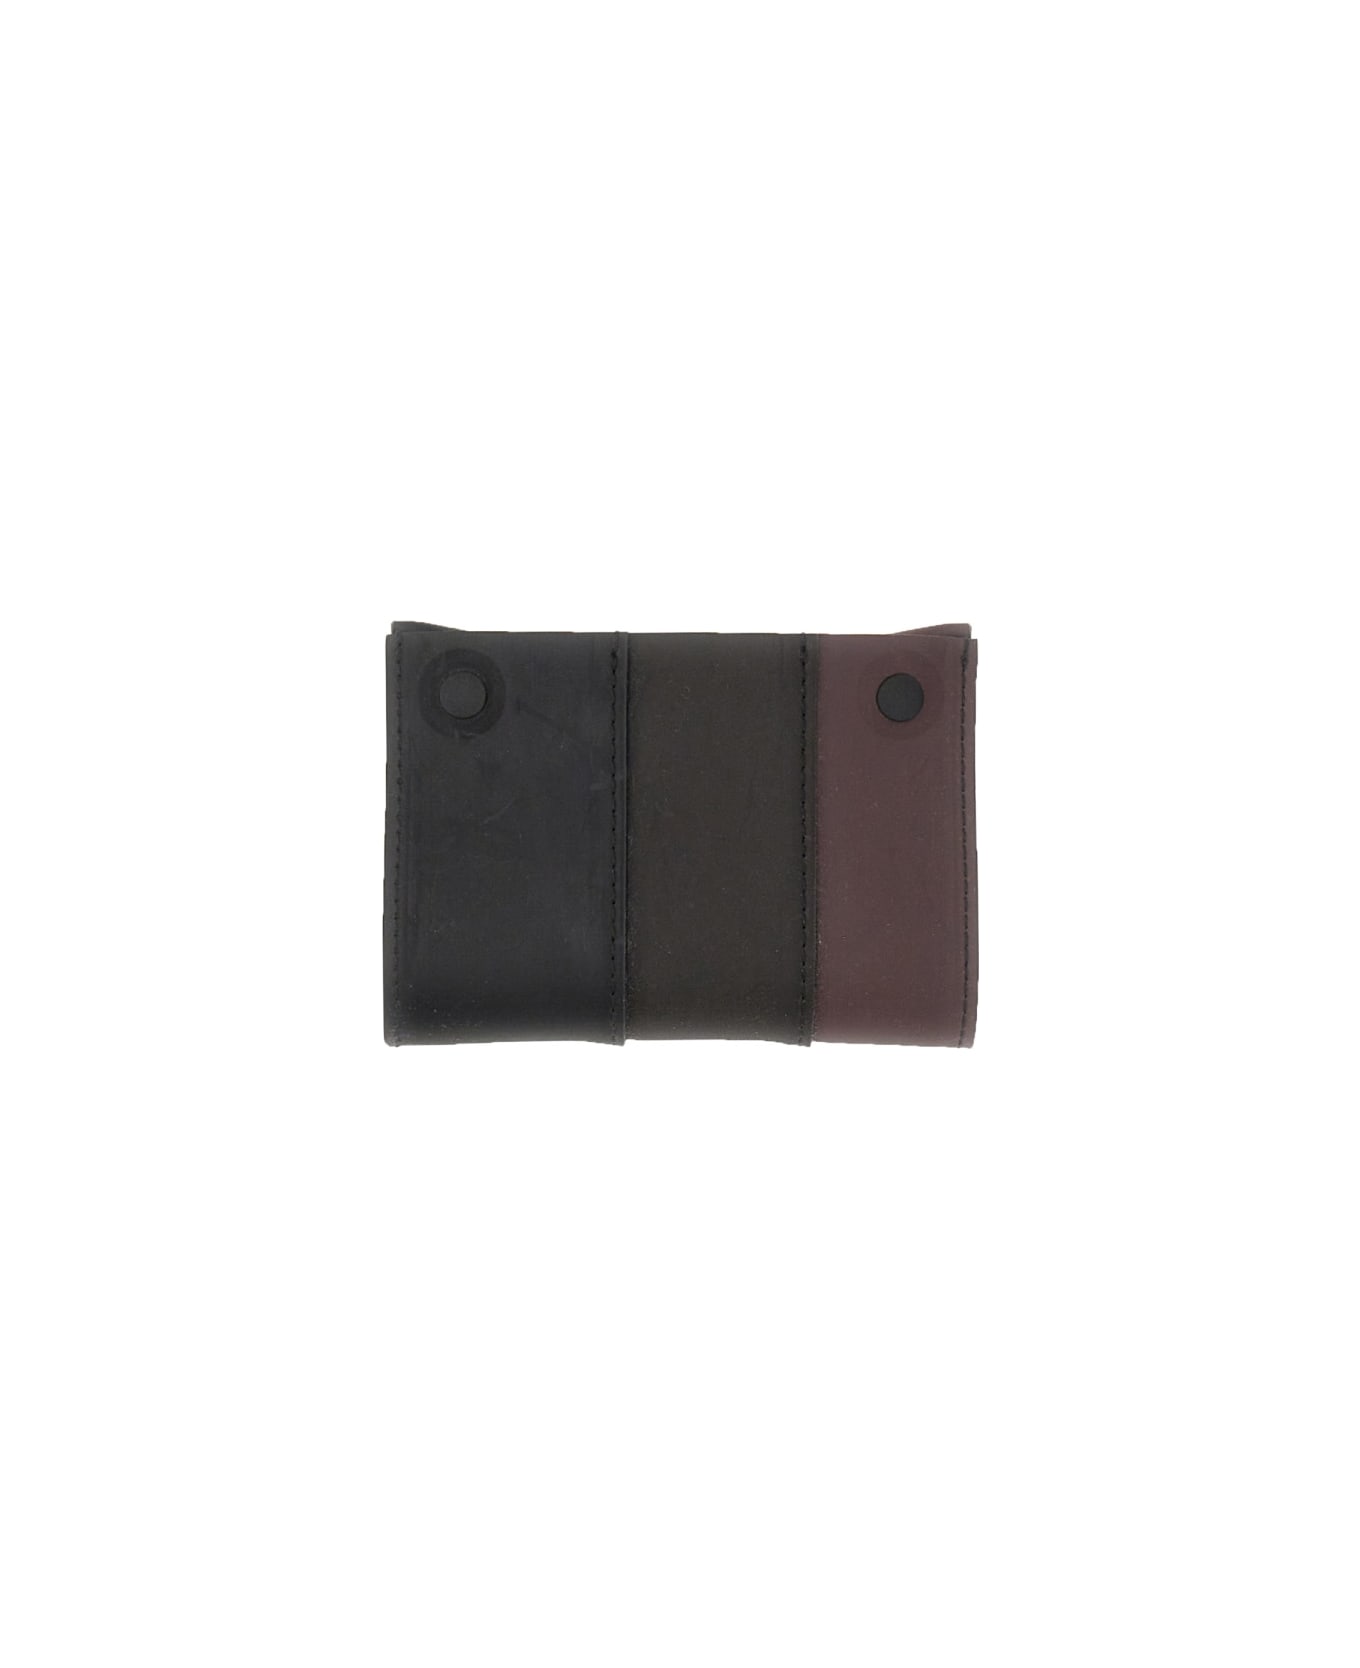 Sunnei Parallelepiped Pudding Wallet - BLACK 財布